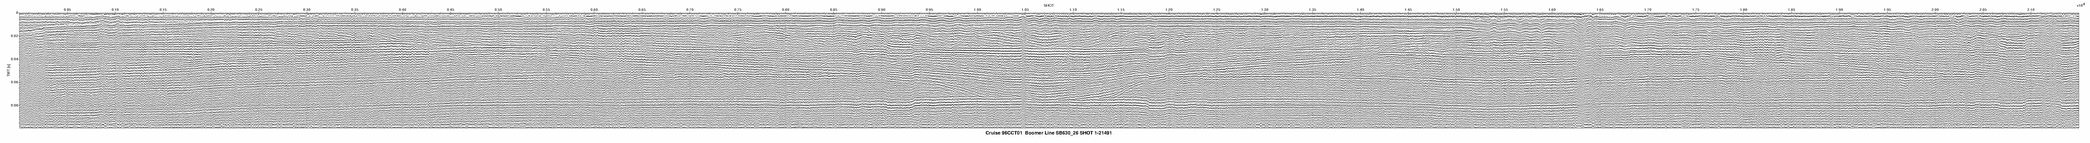 SB630_26 seismic profile thumbnail image with link to full size image